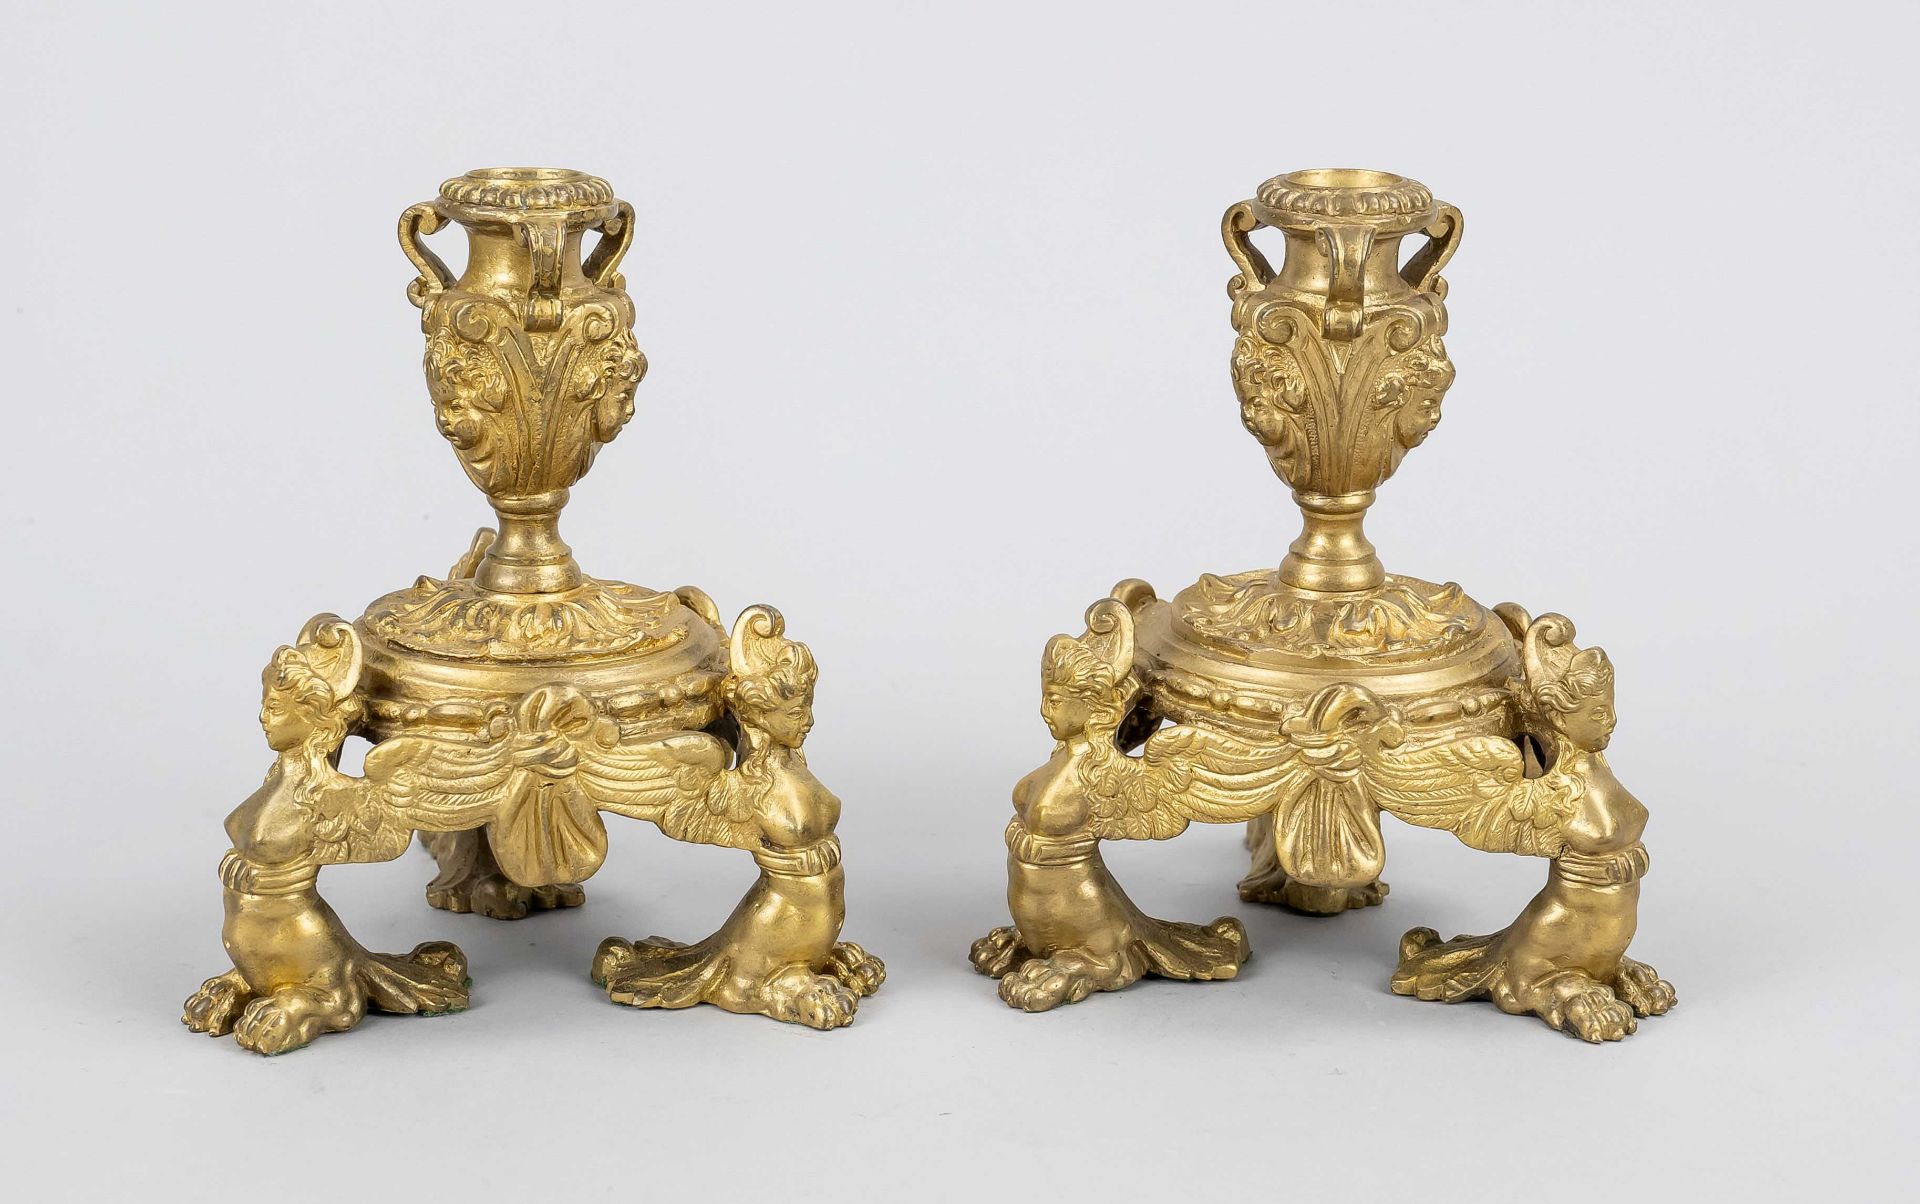 Pair of candlesticks, 19th c., bronze, gilded. Tripod stand with sphinx-like figures, vase spouts